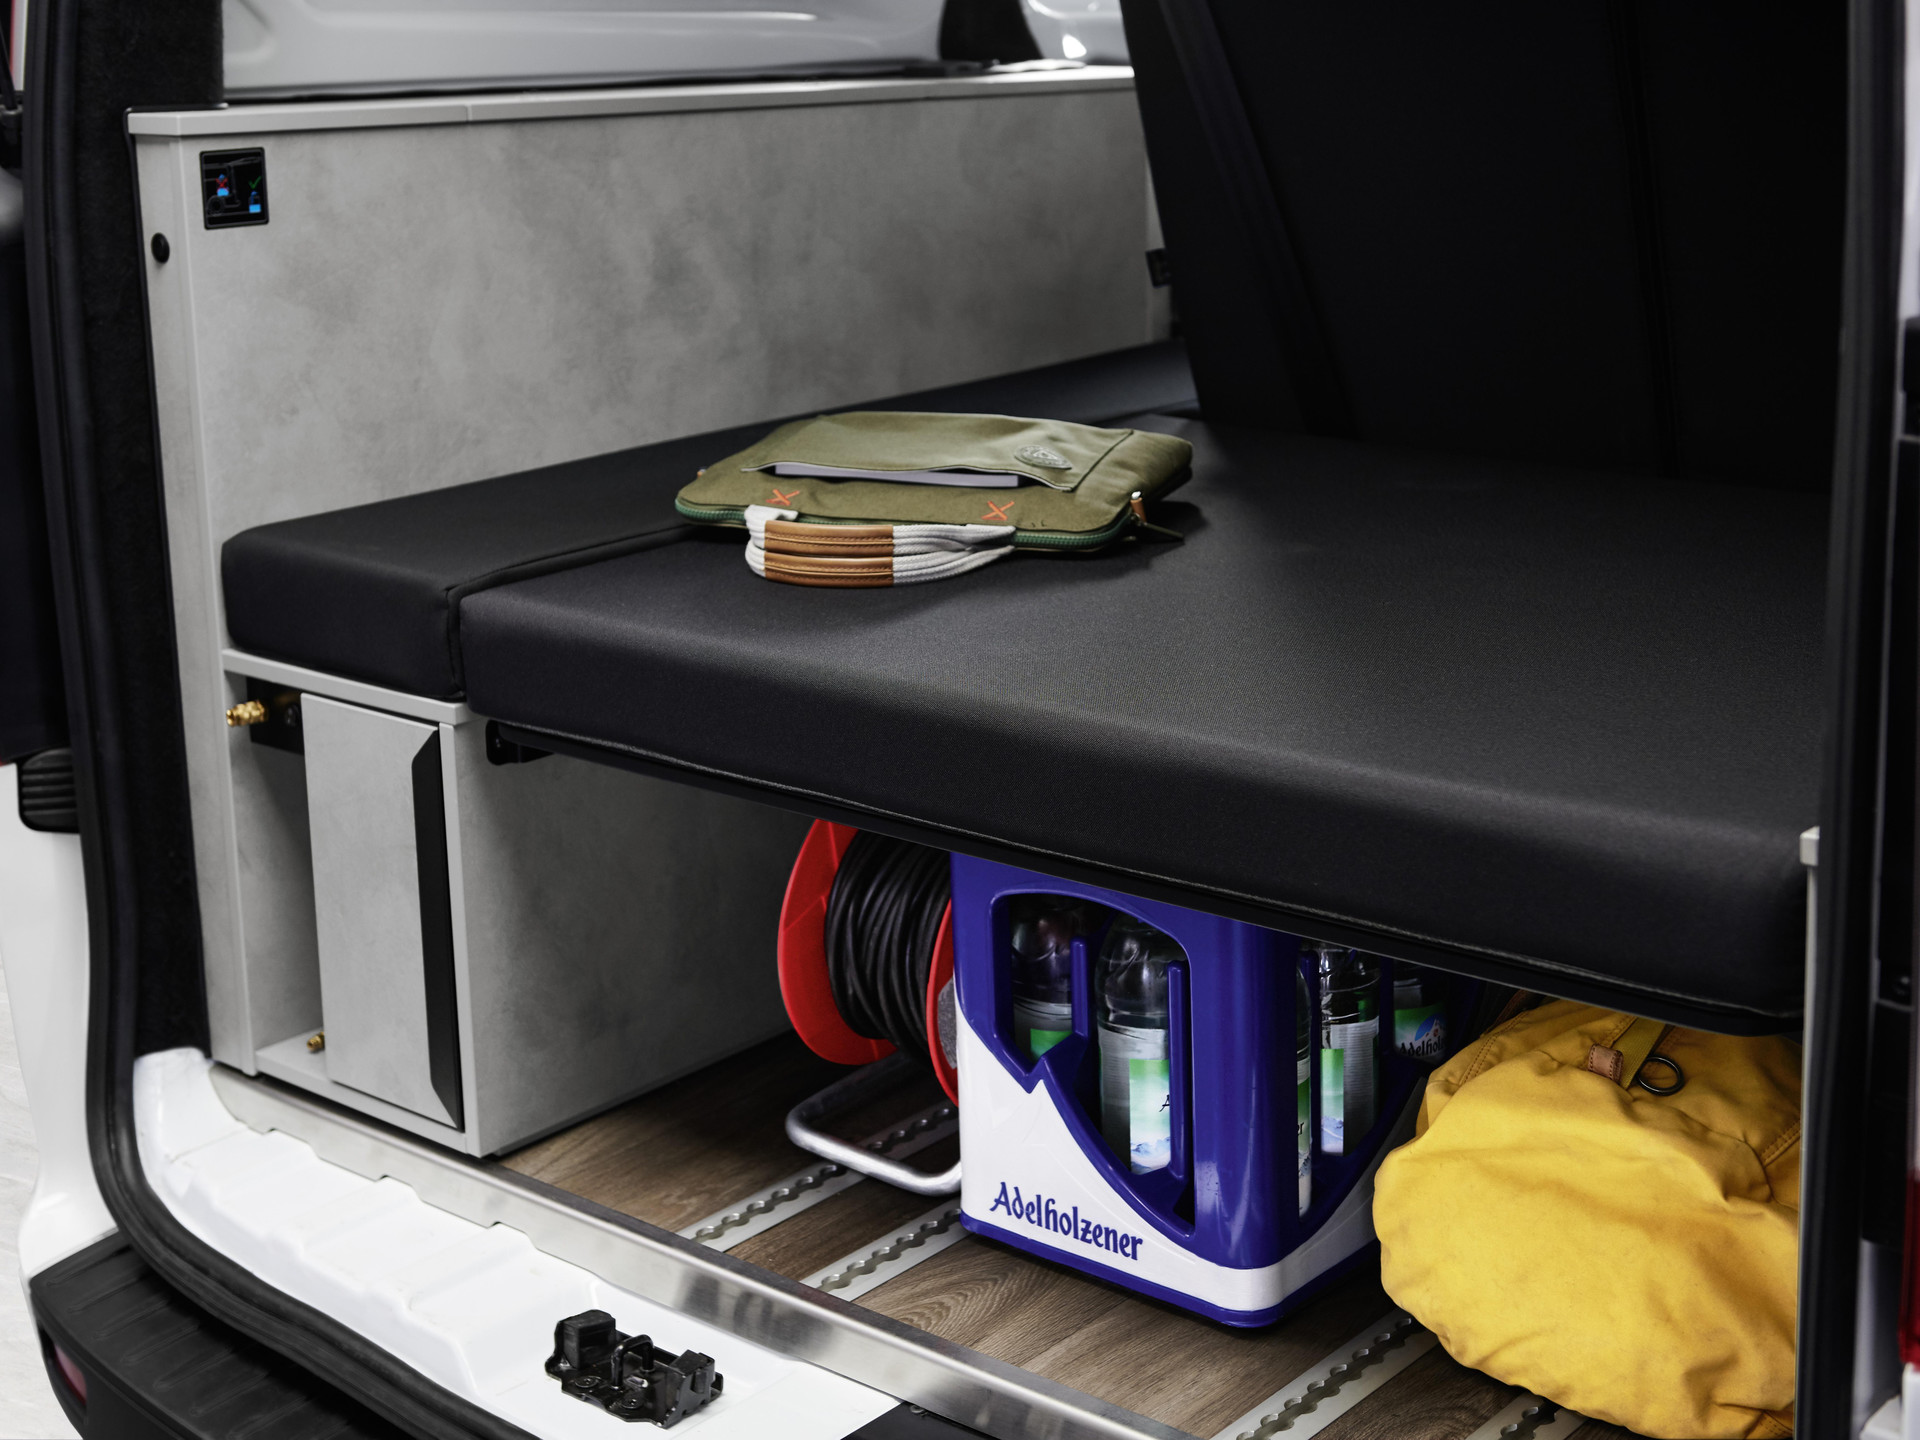 The space under the sleep bench extension offers plenty of space for luggage, shopping and all those things you always need with you.